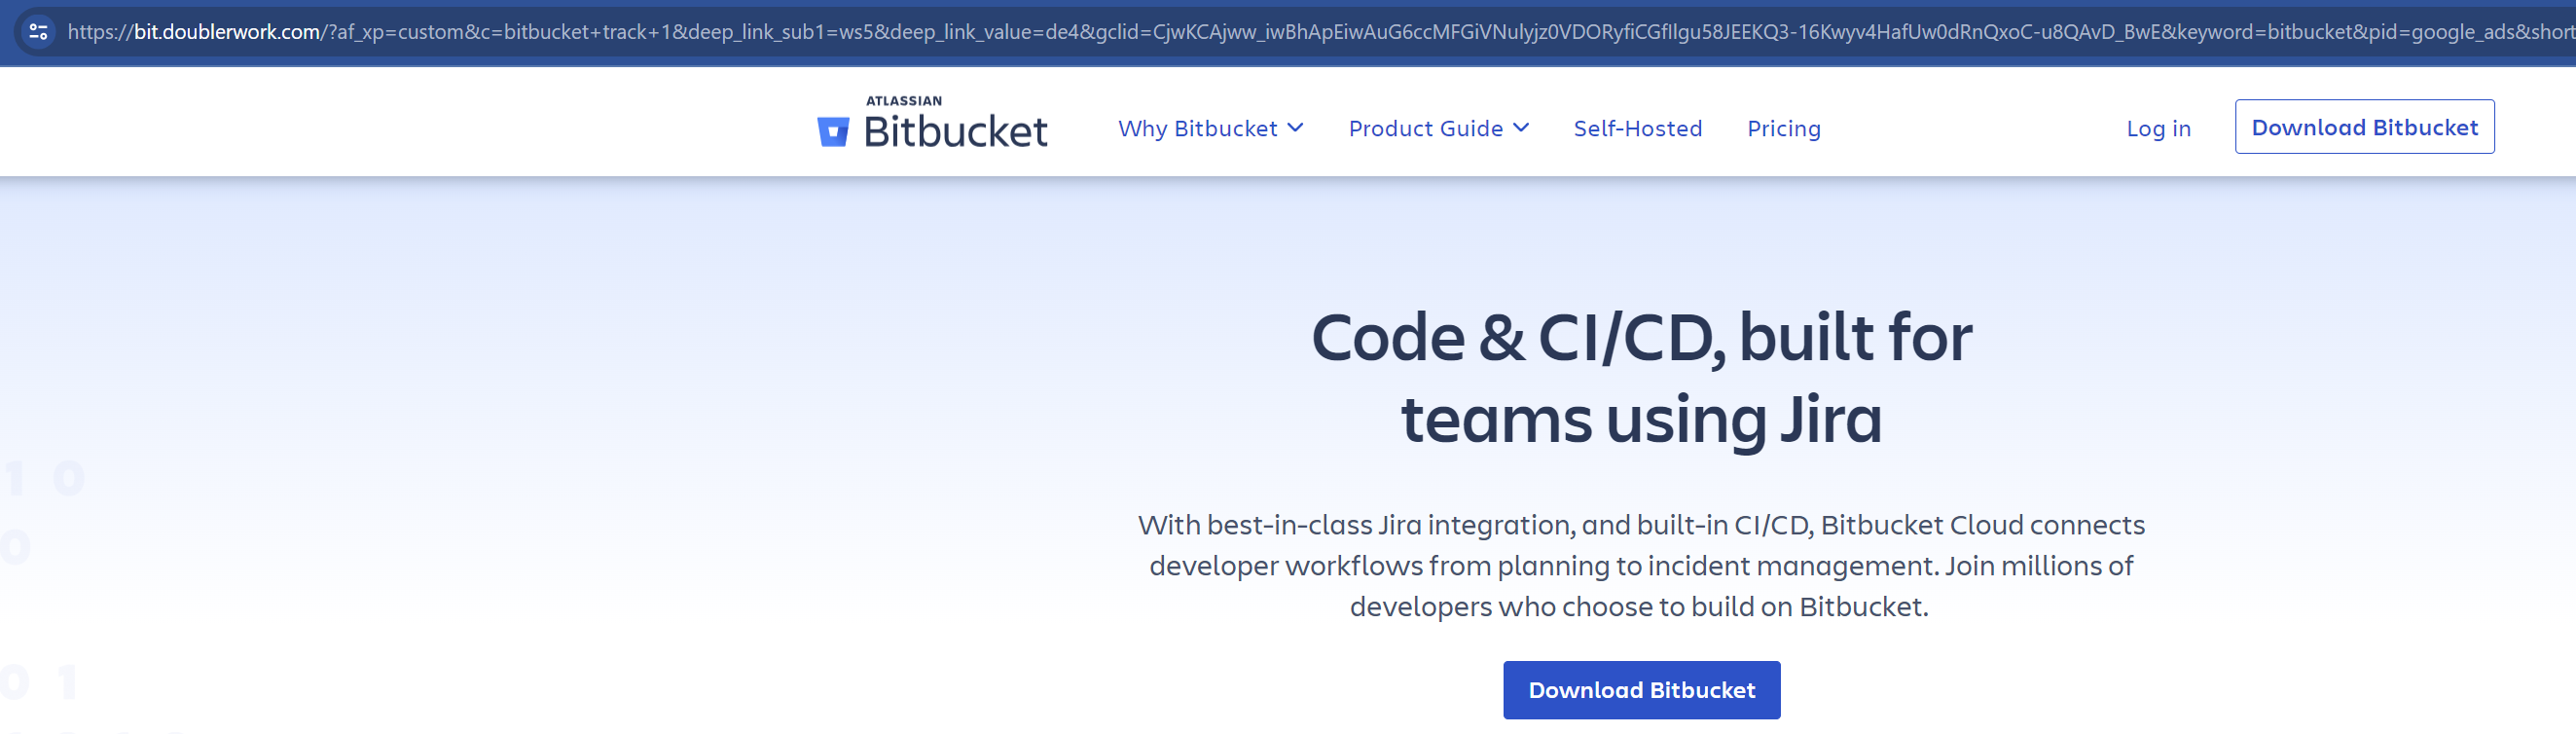 Google Ads for Bitbucket.org – malvertising at its best (Updated)